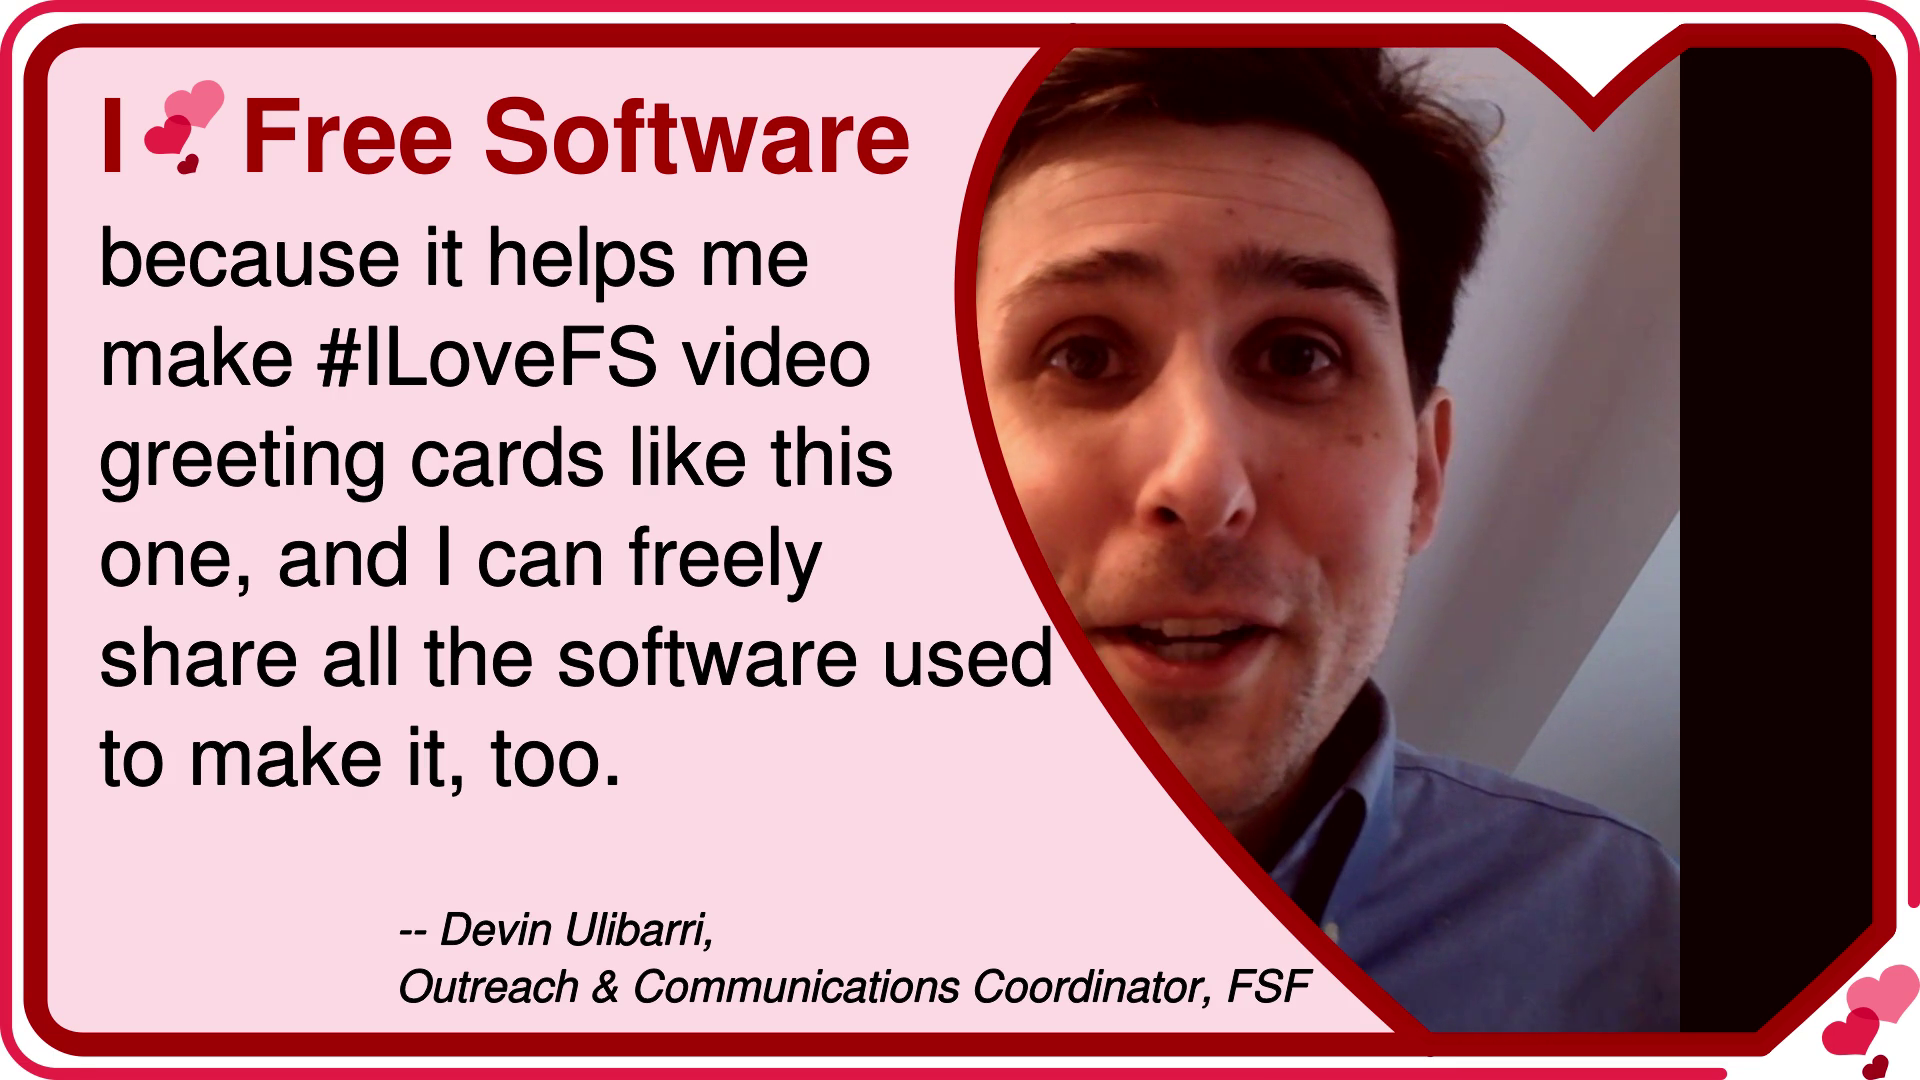 Image of person's profile framed in a heart at right. At left is the text: I love free software because it helps me make #ILoveFS video greeting cards like this one, and I can freely share all the software used to make it, too